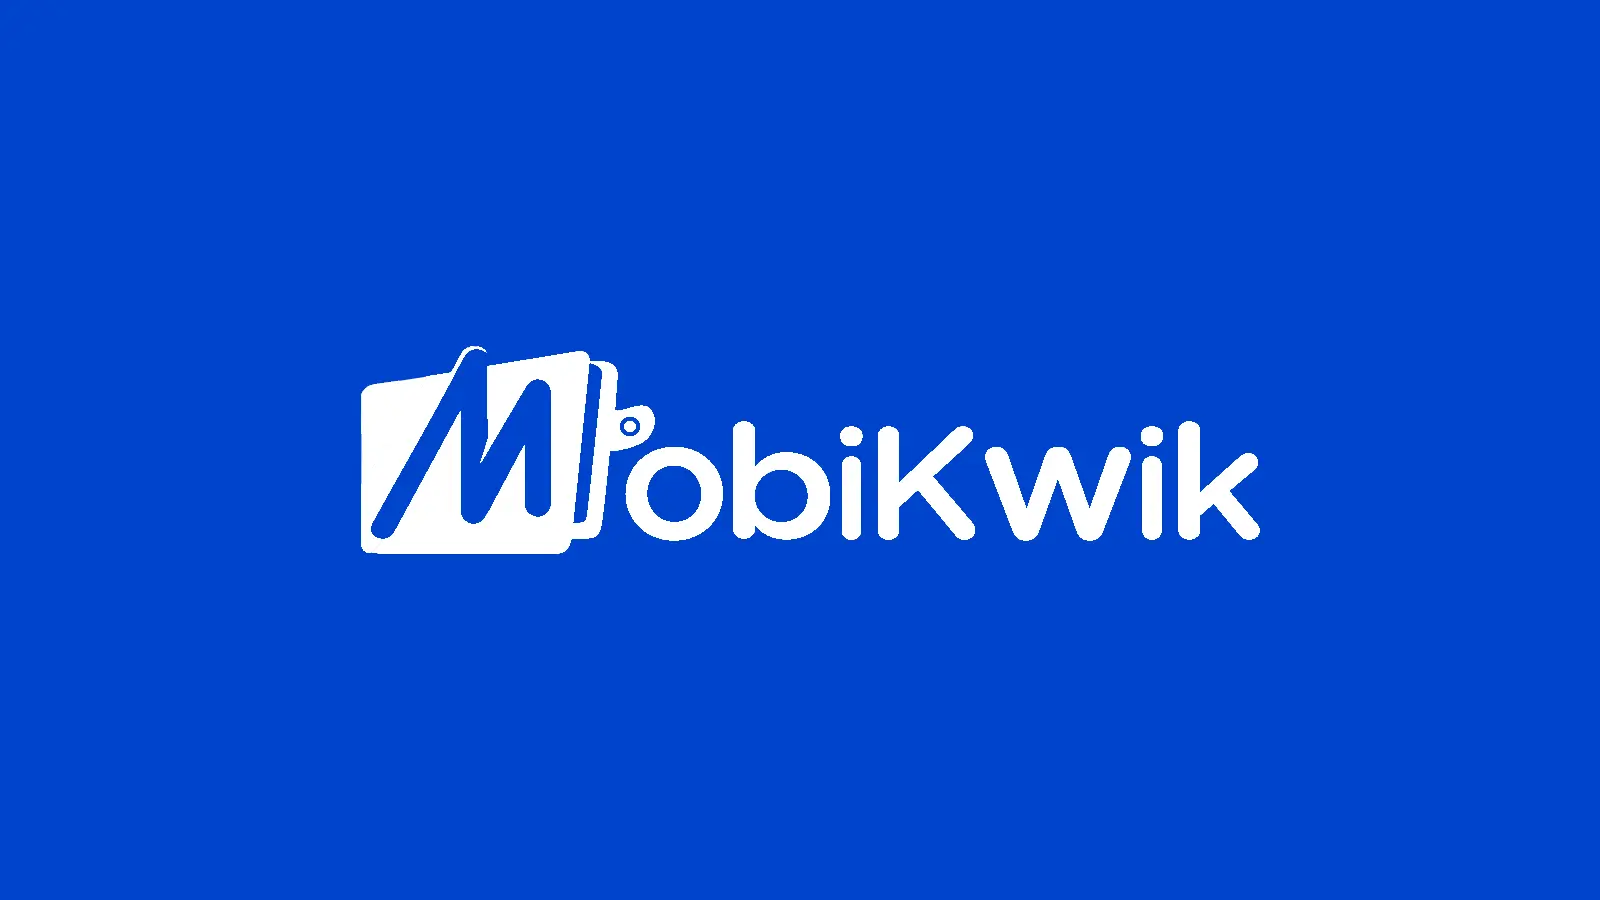 Get 1% Cashback up to Rs 100 With Credit Card on Mobikwik Wallet Reloads! No Charges, Transfer to Bank